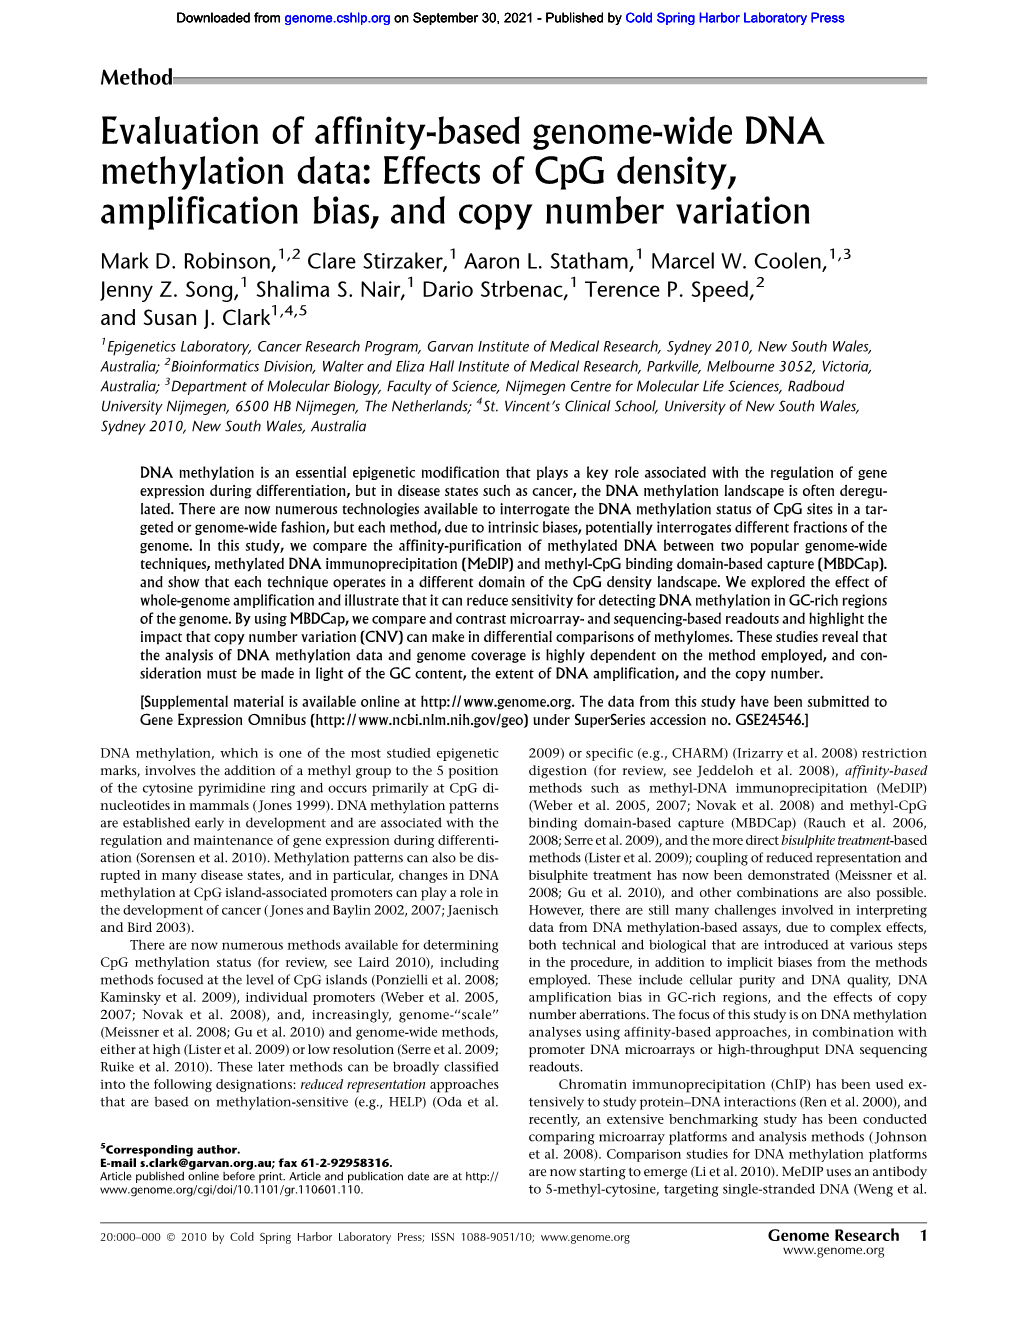 Evaluation of Affinity-Based Genome-Wide DNA Methylation Data: Effects of Cpg Density, Amplification Bias, and Copy Number Variation